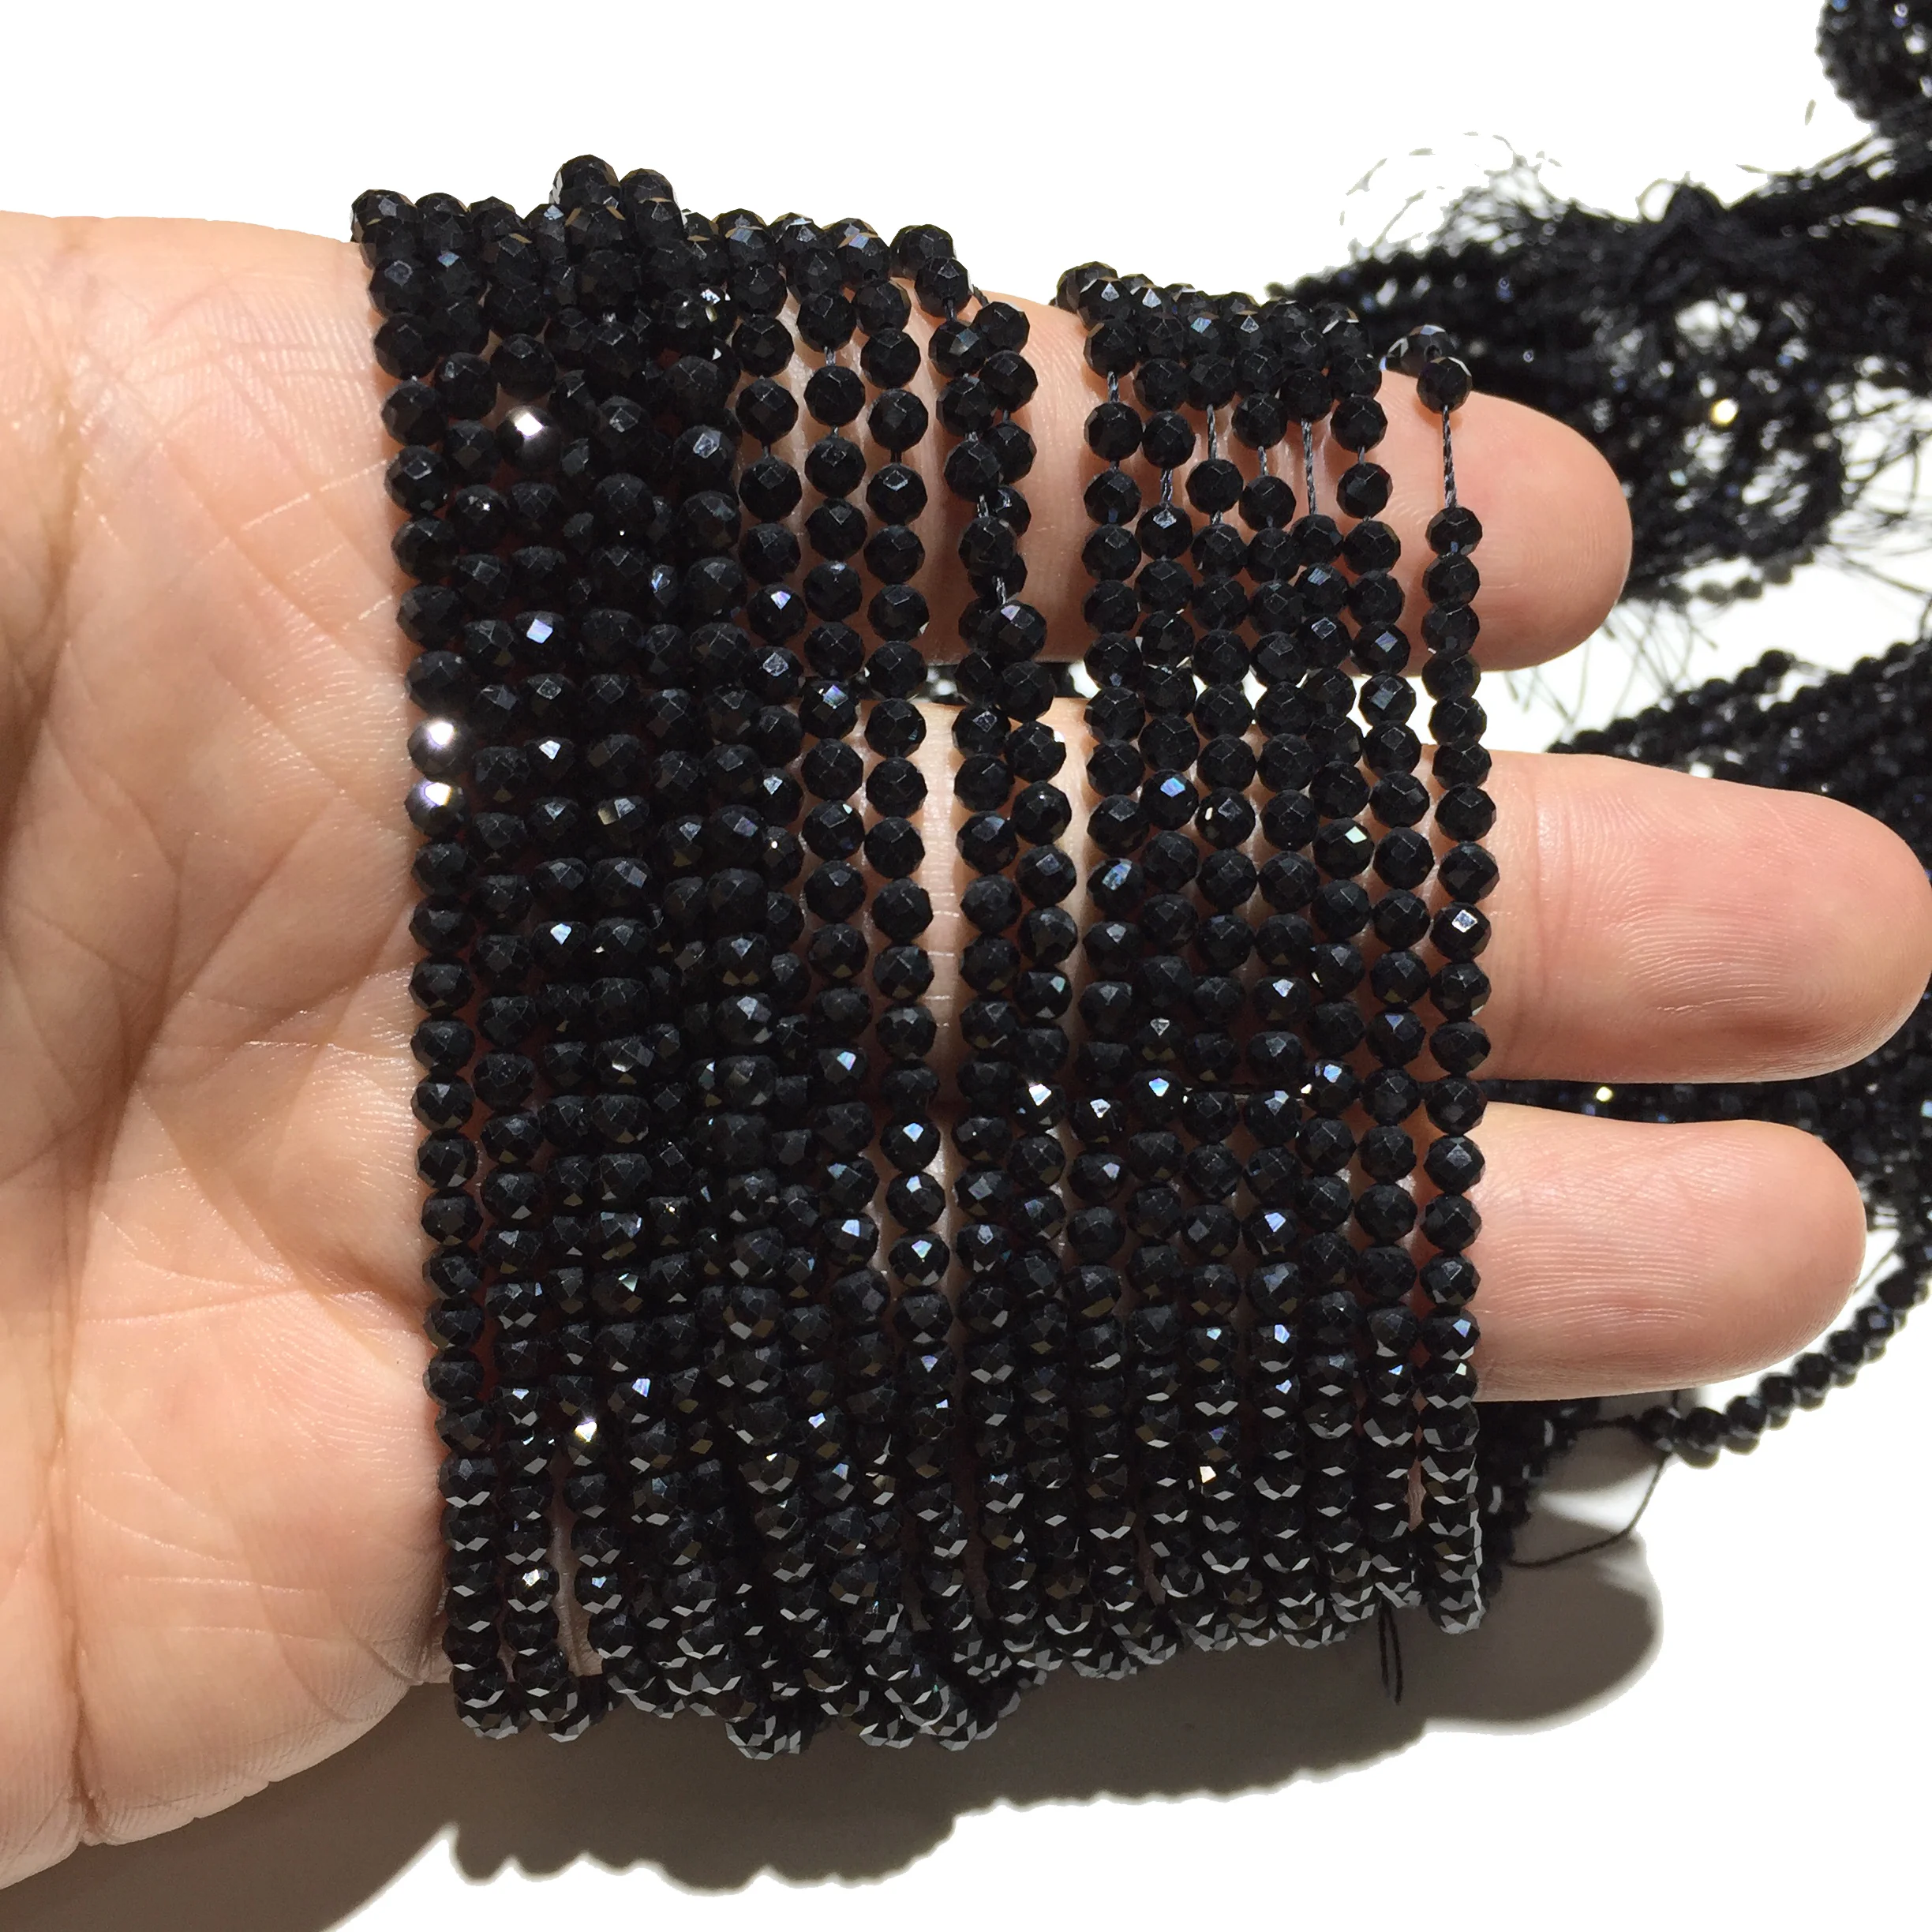 1 Strand Natural Black Spinel Faceted Heishi Tyre Shape 4 To 6 mm Beads  Faceted Beads 8 Long Natural Black Spinel Faceted Heishi Beads